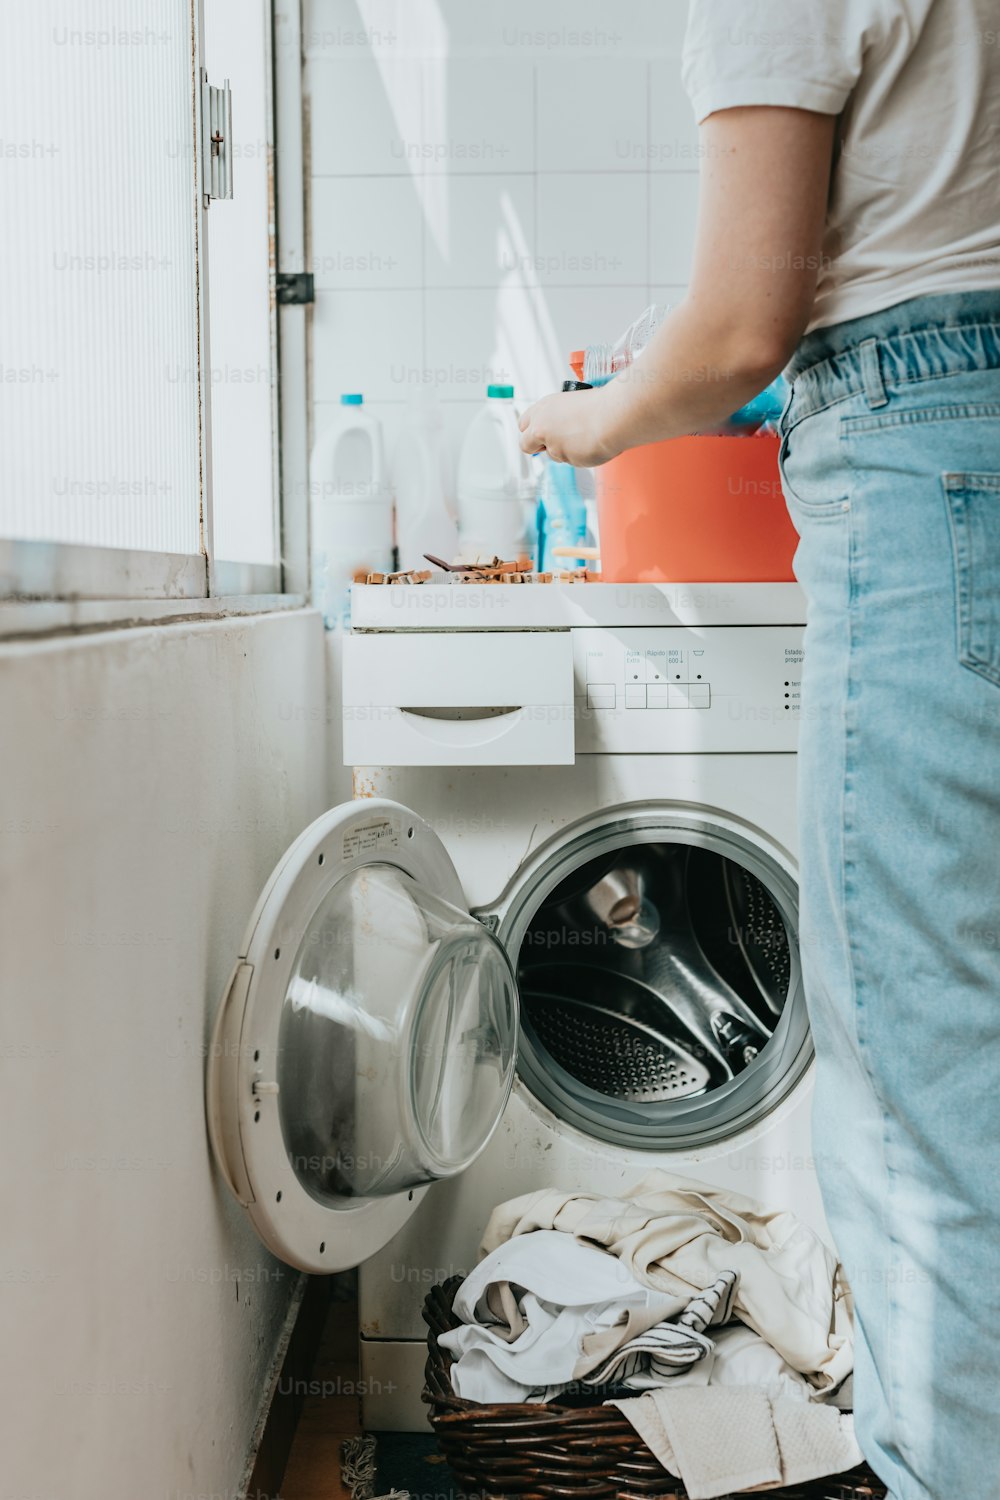 Wash Machine Pictures  Download Free Images on Unsplash